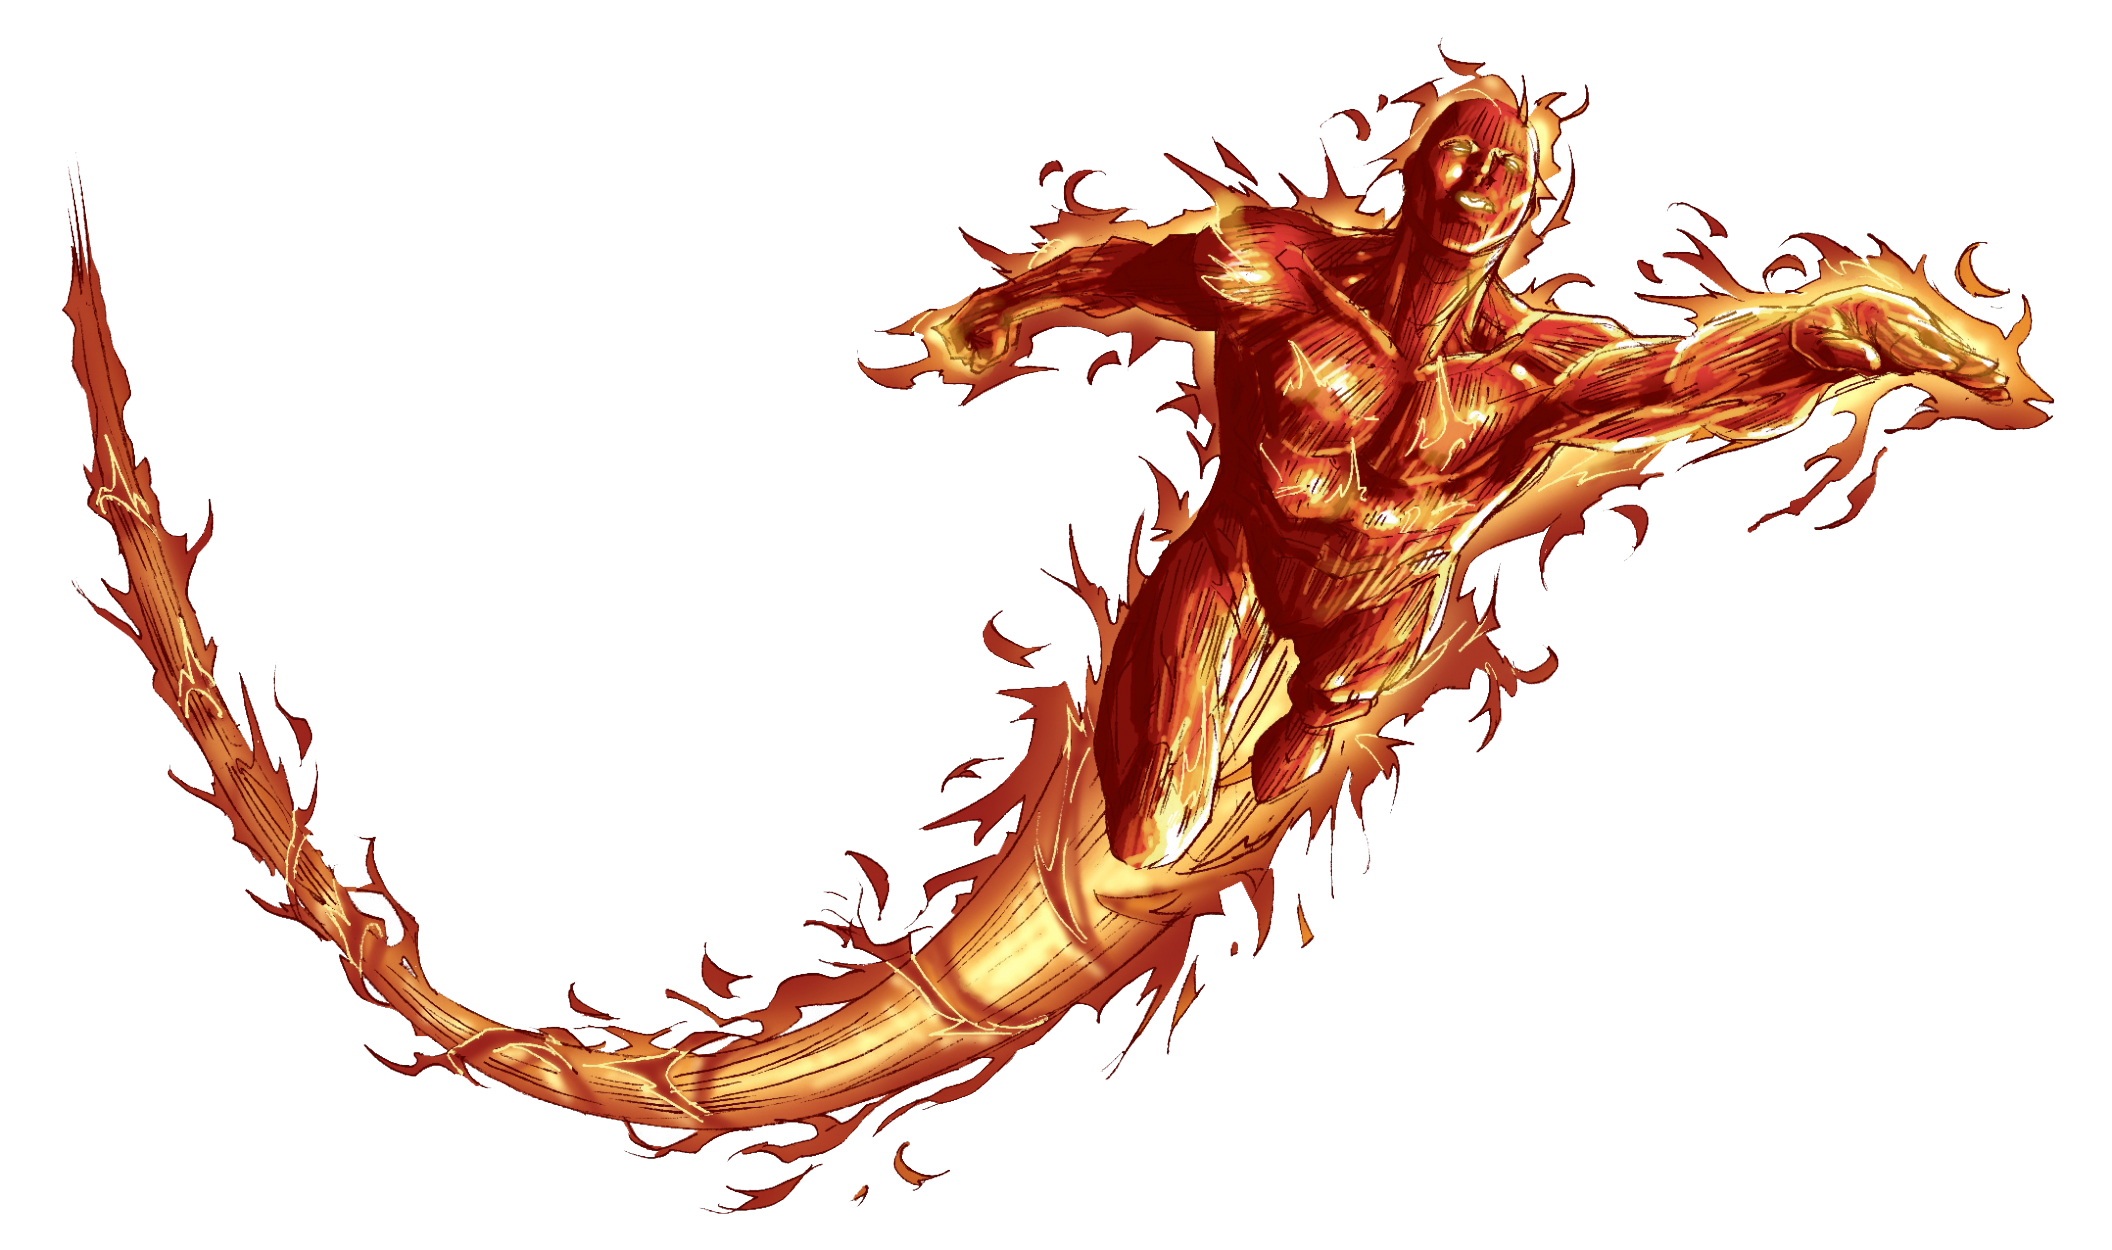 Human Torch Png - Human Torch Png Hd Png Image, Transparent background PNG HD thumbnail